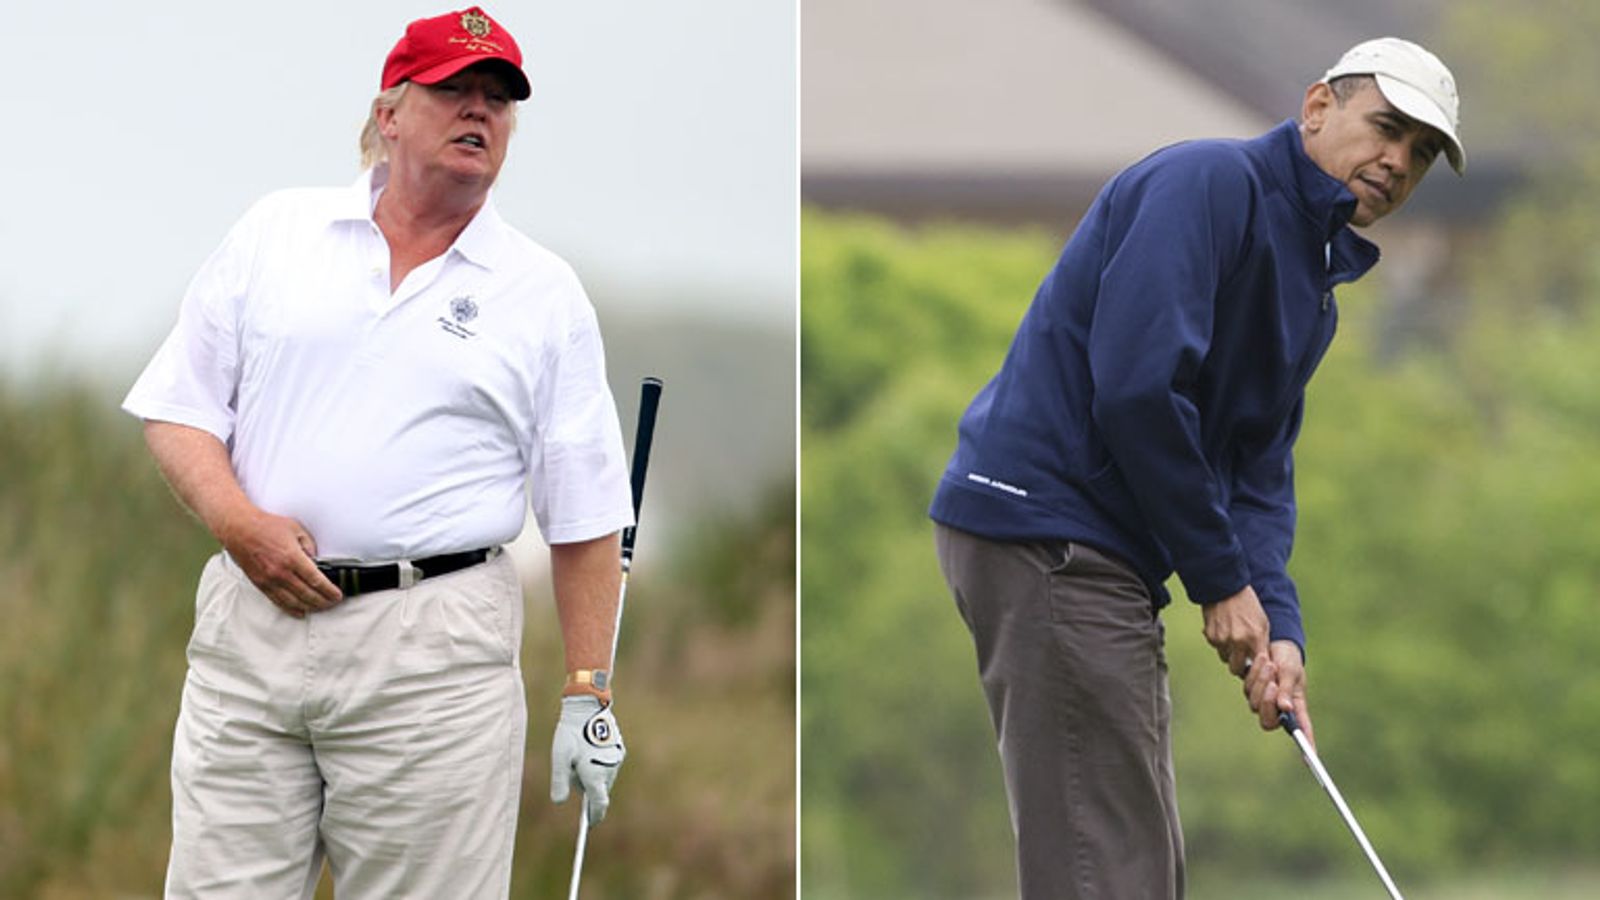 Is Donald Trump playing more golf as President than Barack Obama?